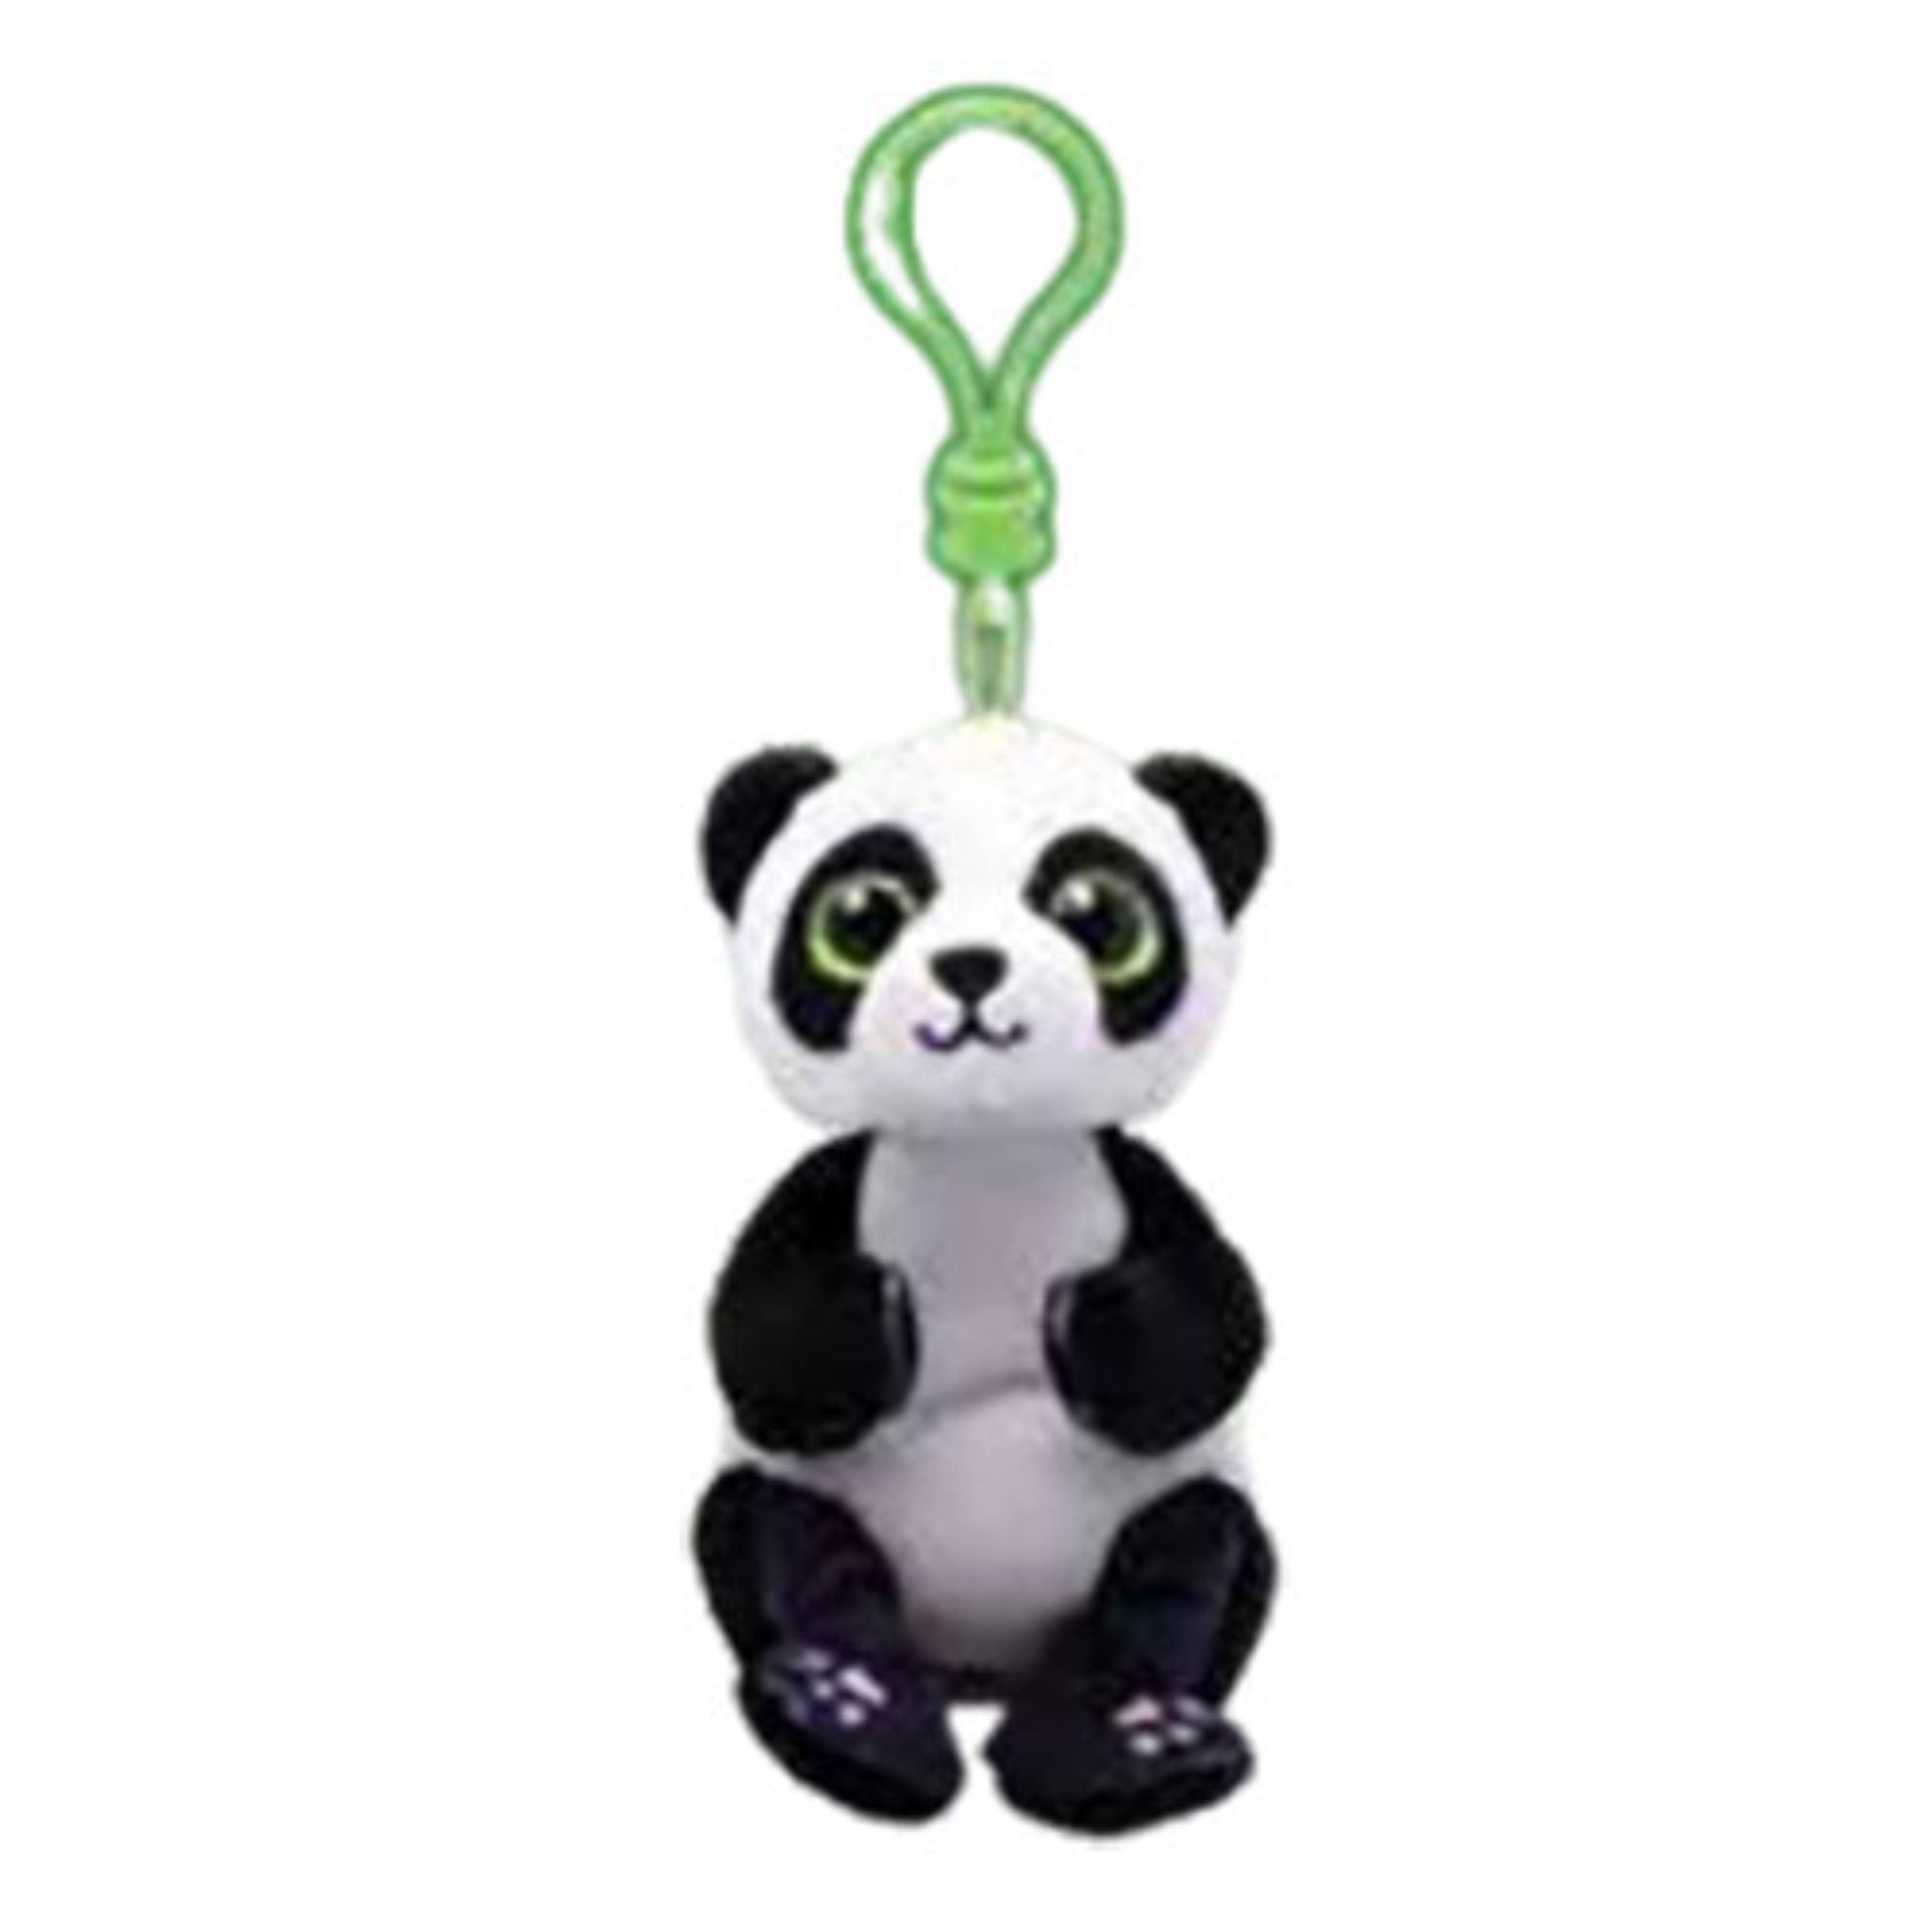 TY-Beanie Bellie - Ying the Panda - 5